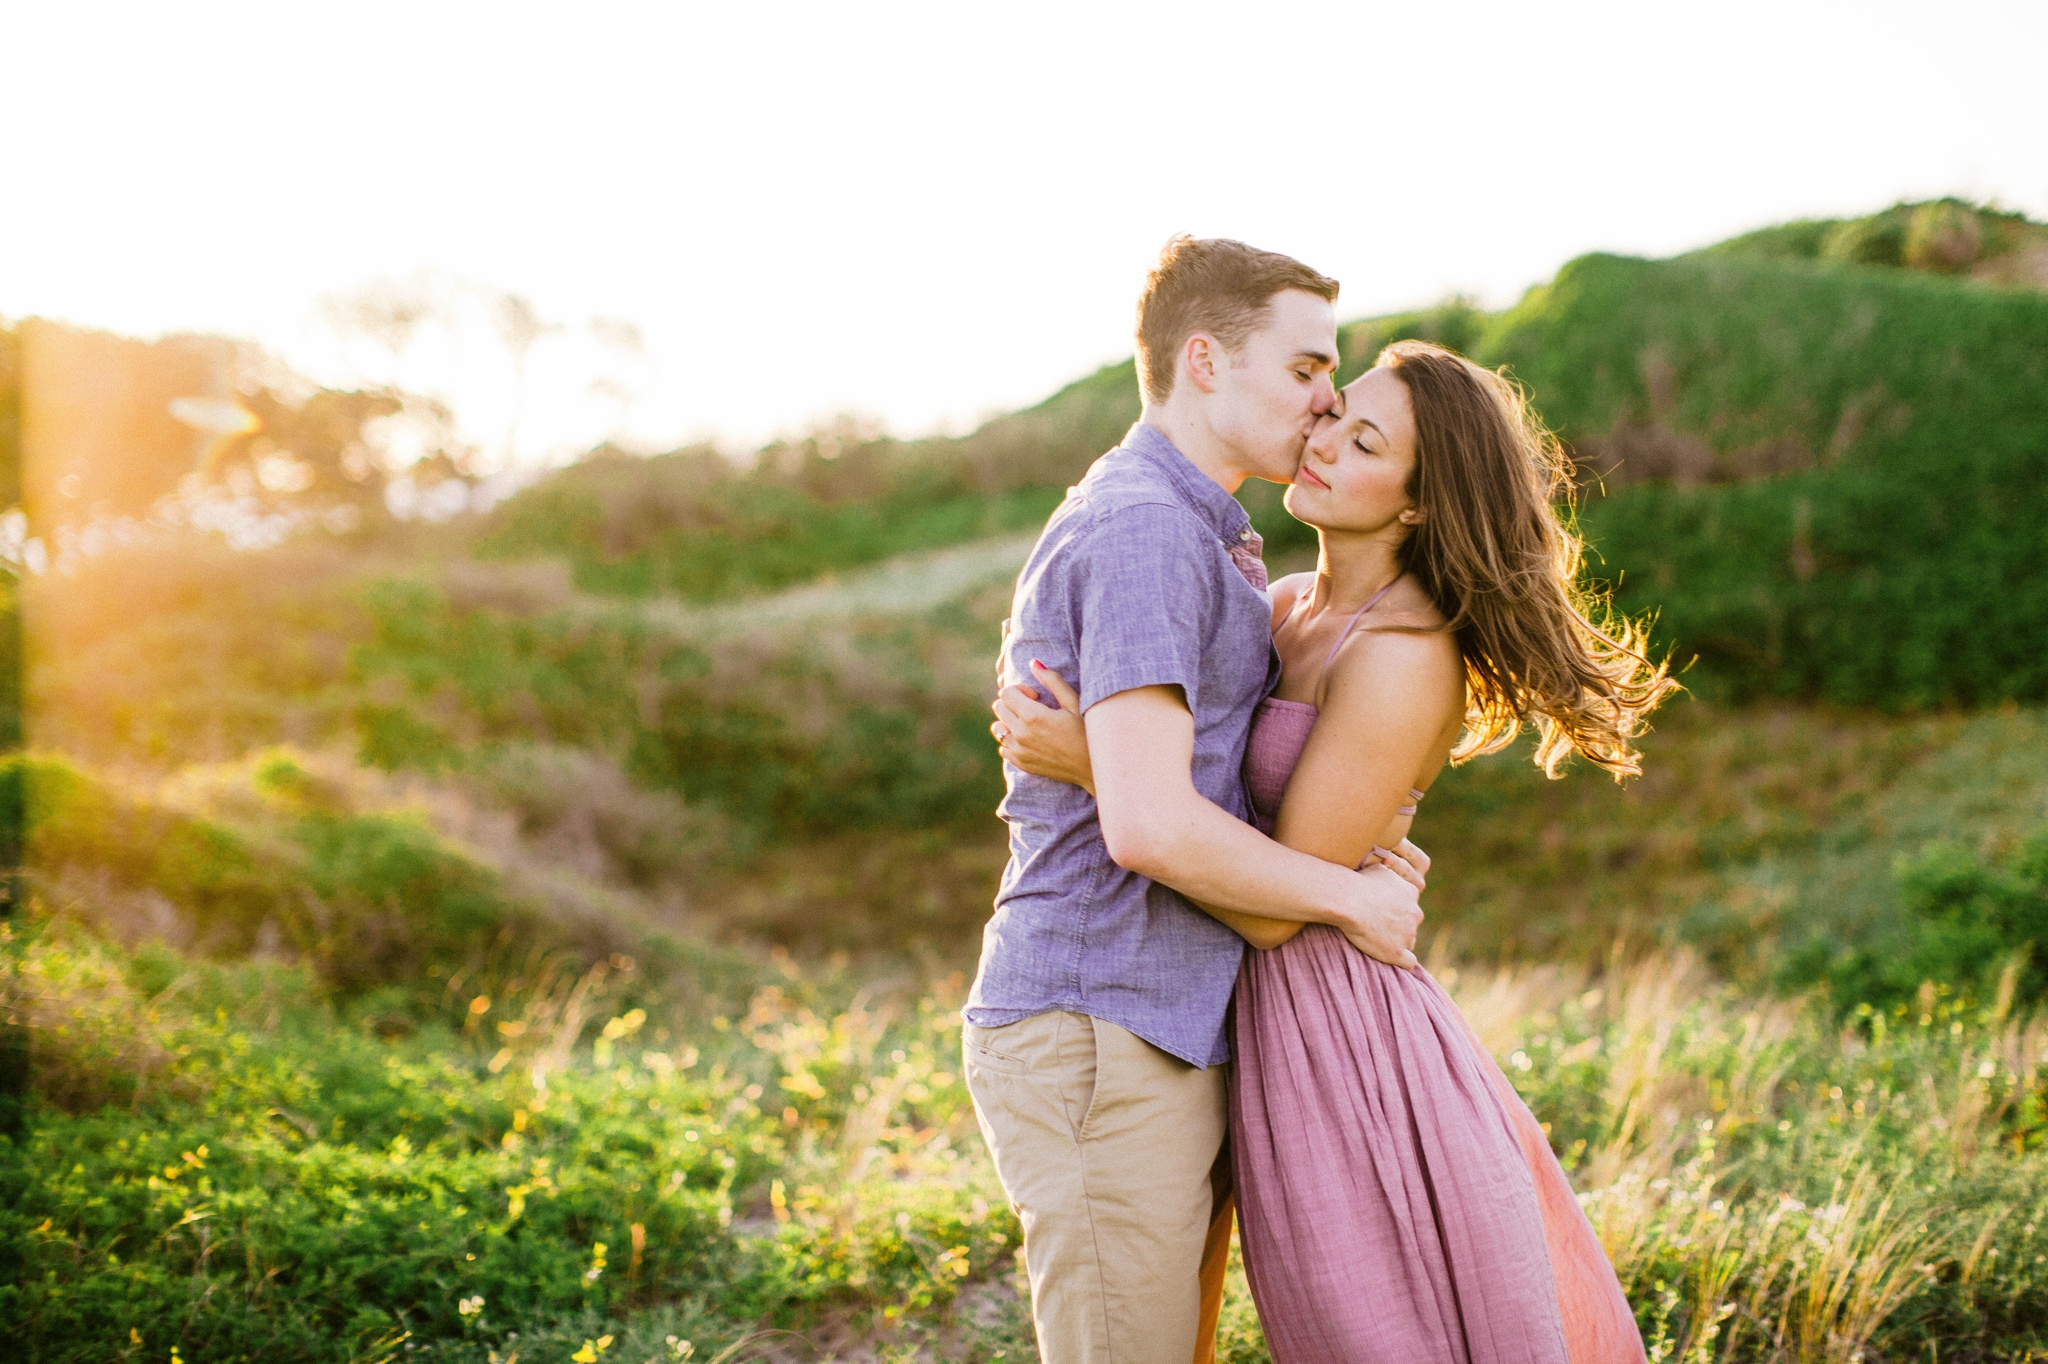  couple looking at each other while his hand is in her hair - in front of lush green dunes and hills with the sunset behind them - Woman is in a flowy pastel maxi dress - outdoor golden light session - engagement photographer in honolulu, oahu, hawai